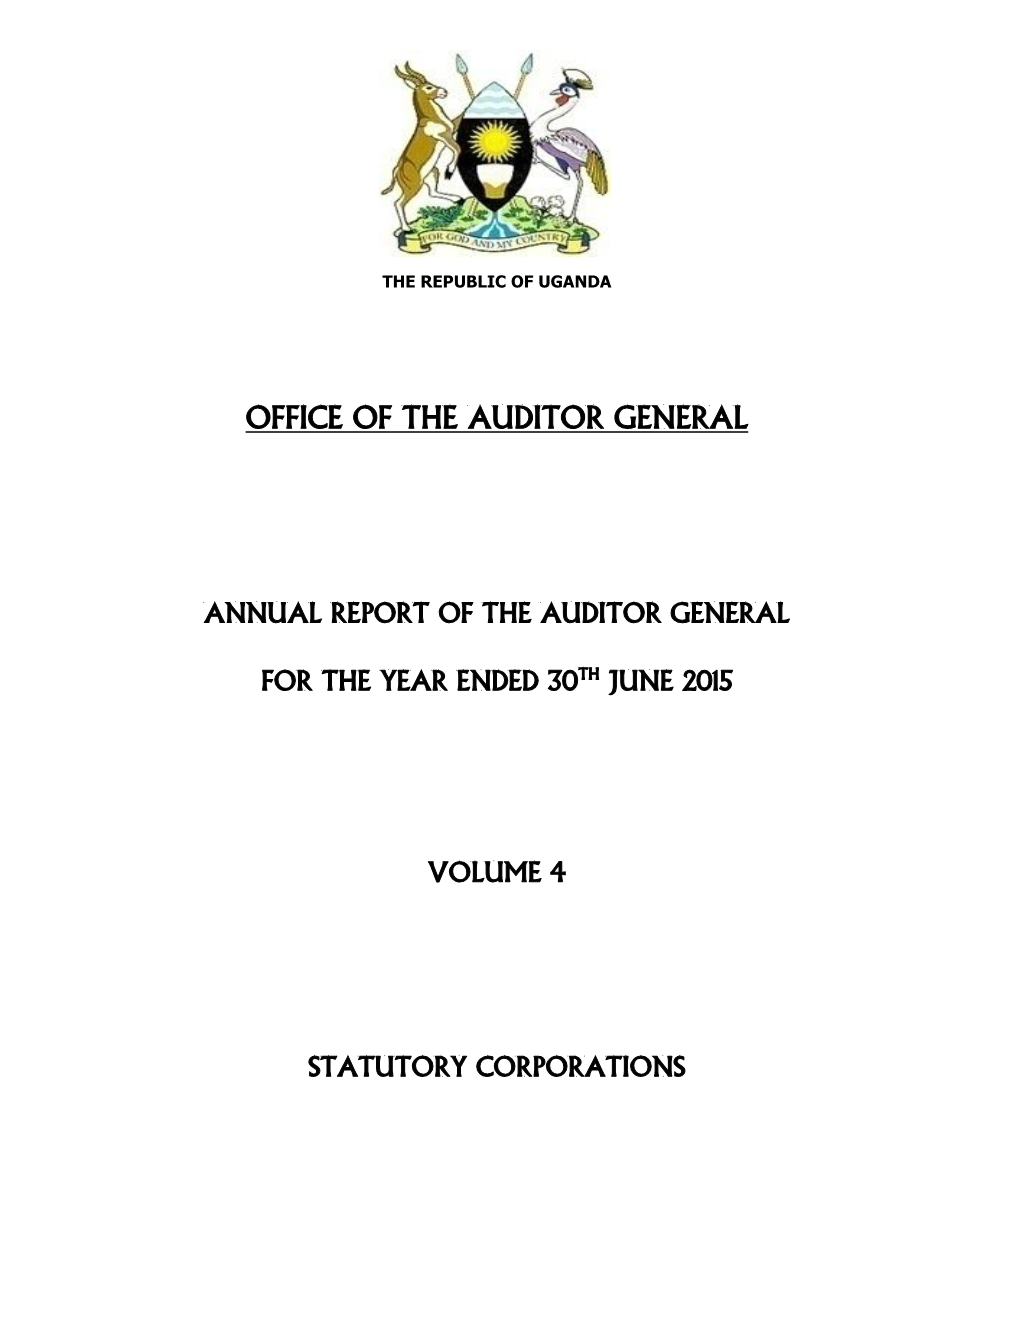 Annual Report of the Auditor General for the Year Ended 30Th June 2015 Volume 4 Statutory Corporations